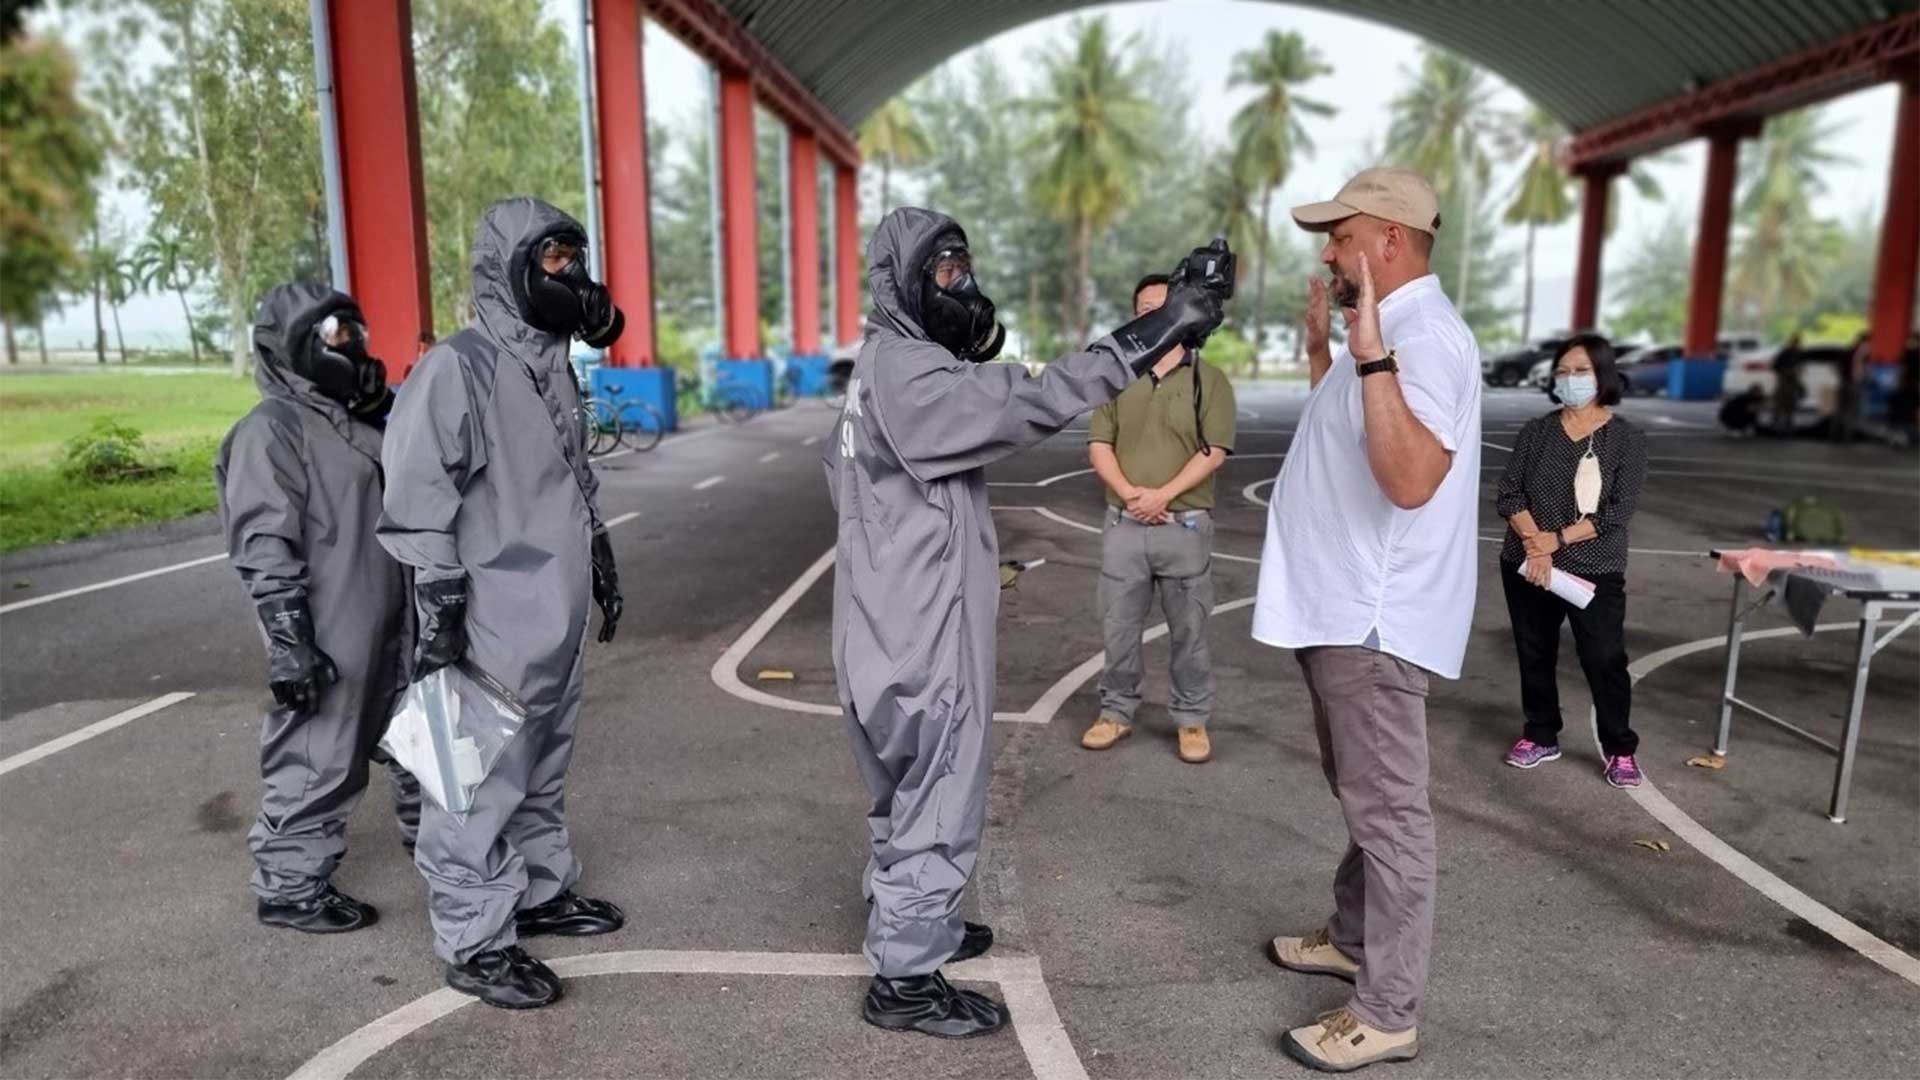 This Fall, a Defense Threat Reduction Agency (DTRA) building partnership capacity team completed an intensive three-week slate of training for Thailand.  They successfully transferred and provided training on new Chemical, Biological, Radiological and Nuclear (CBRN) detection and response equipment, followed by an in-depth Counter-WMD (CWMD) Operations course.